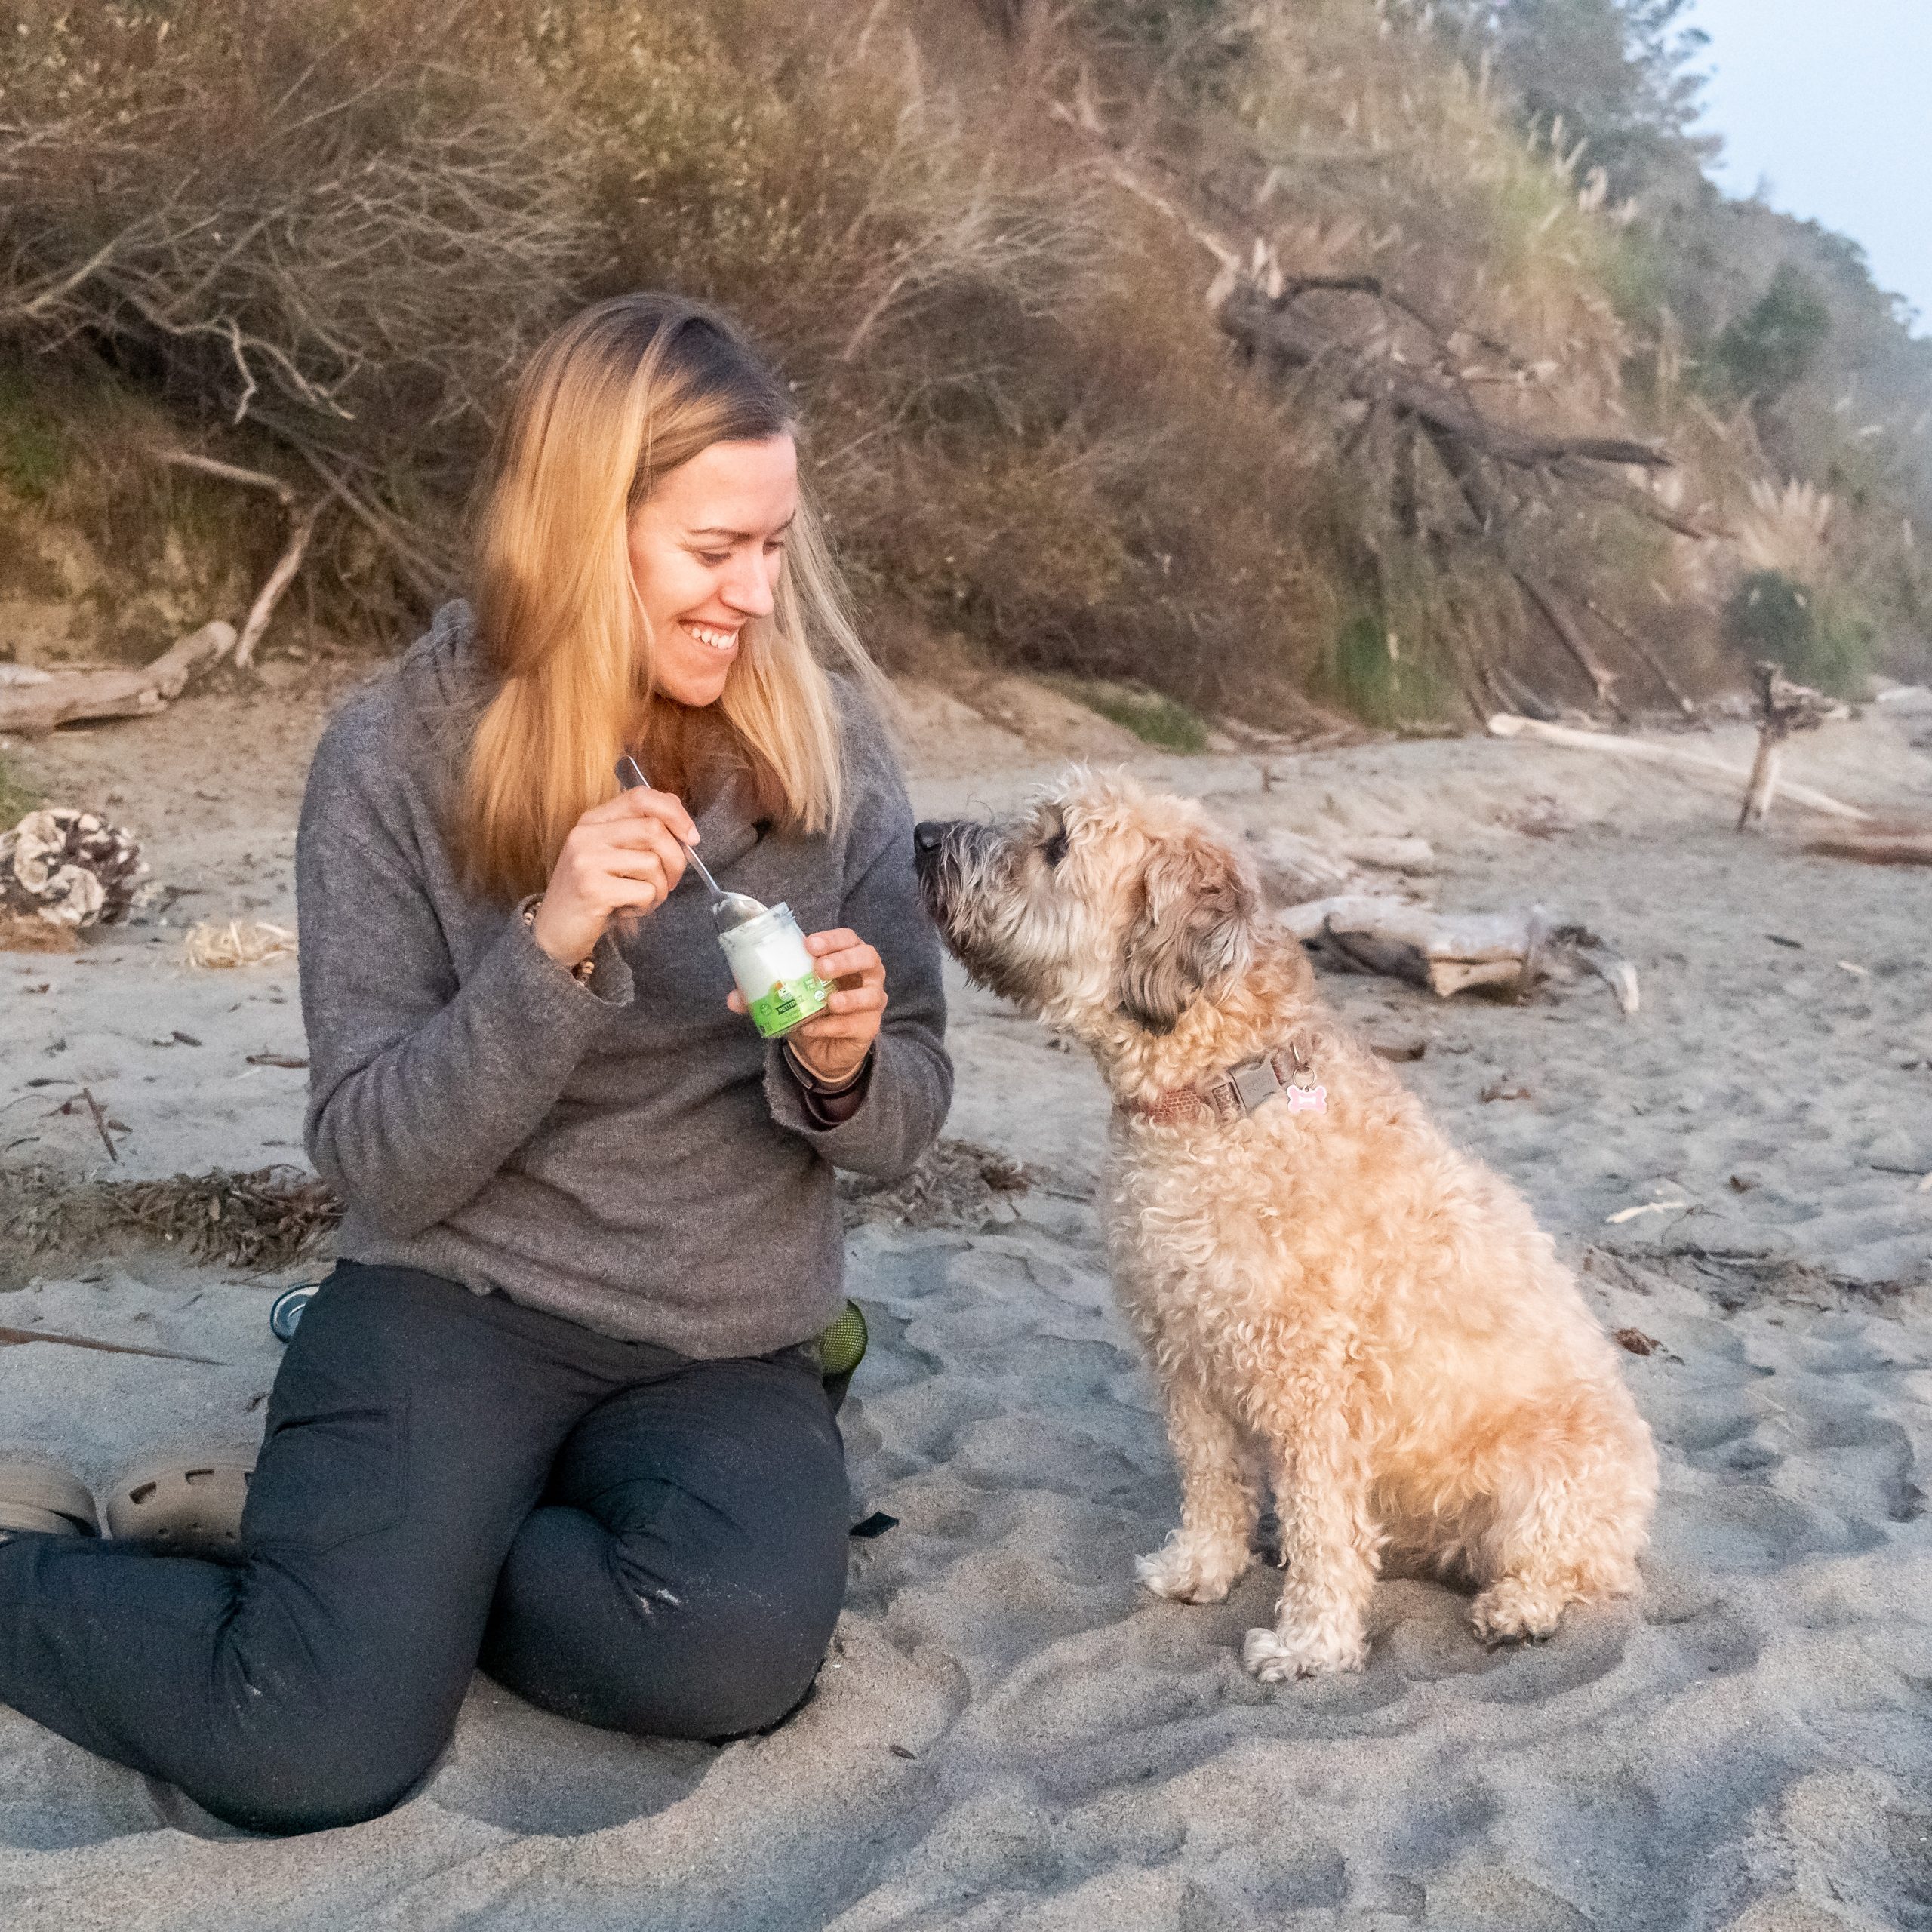 Me and my dog enjoying a snack on the beach